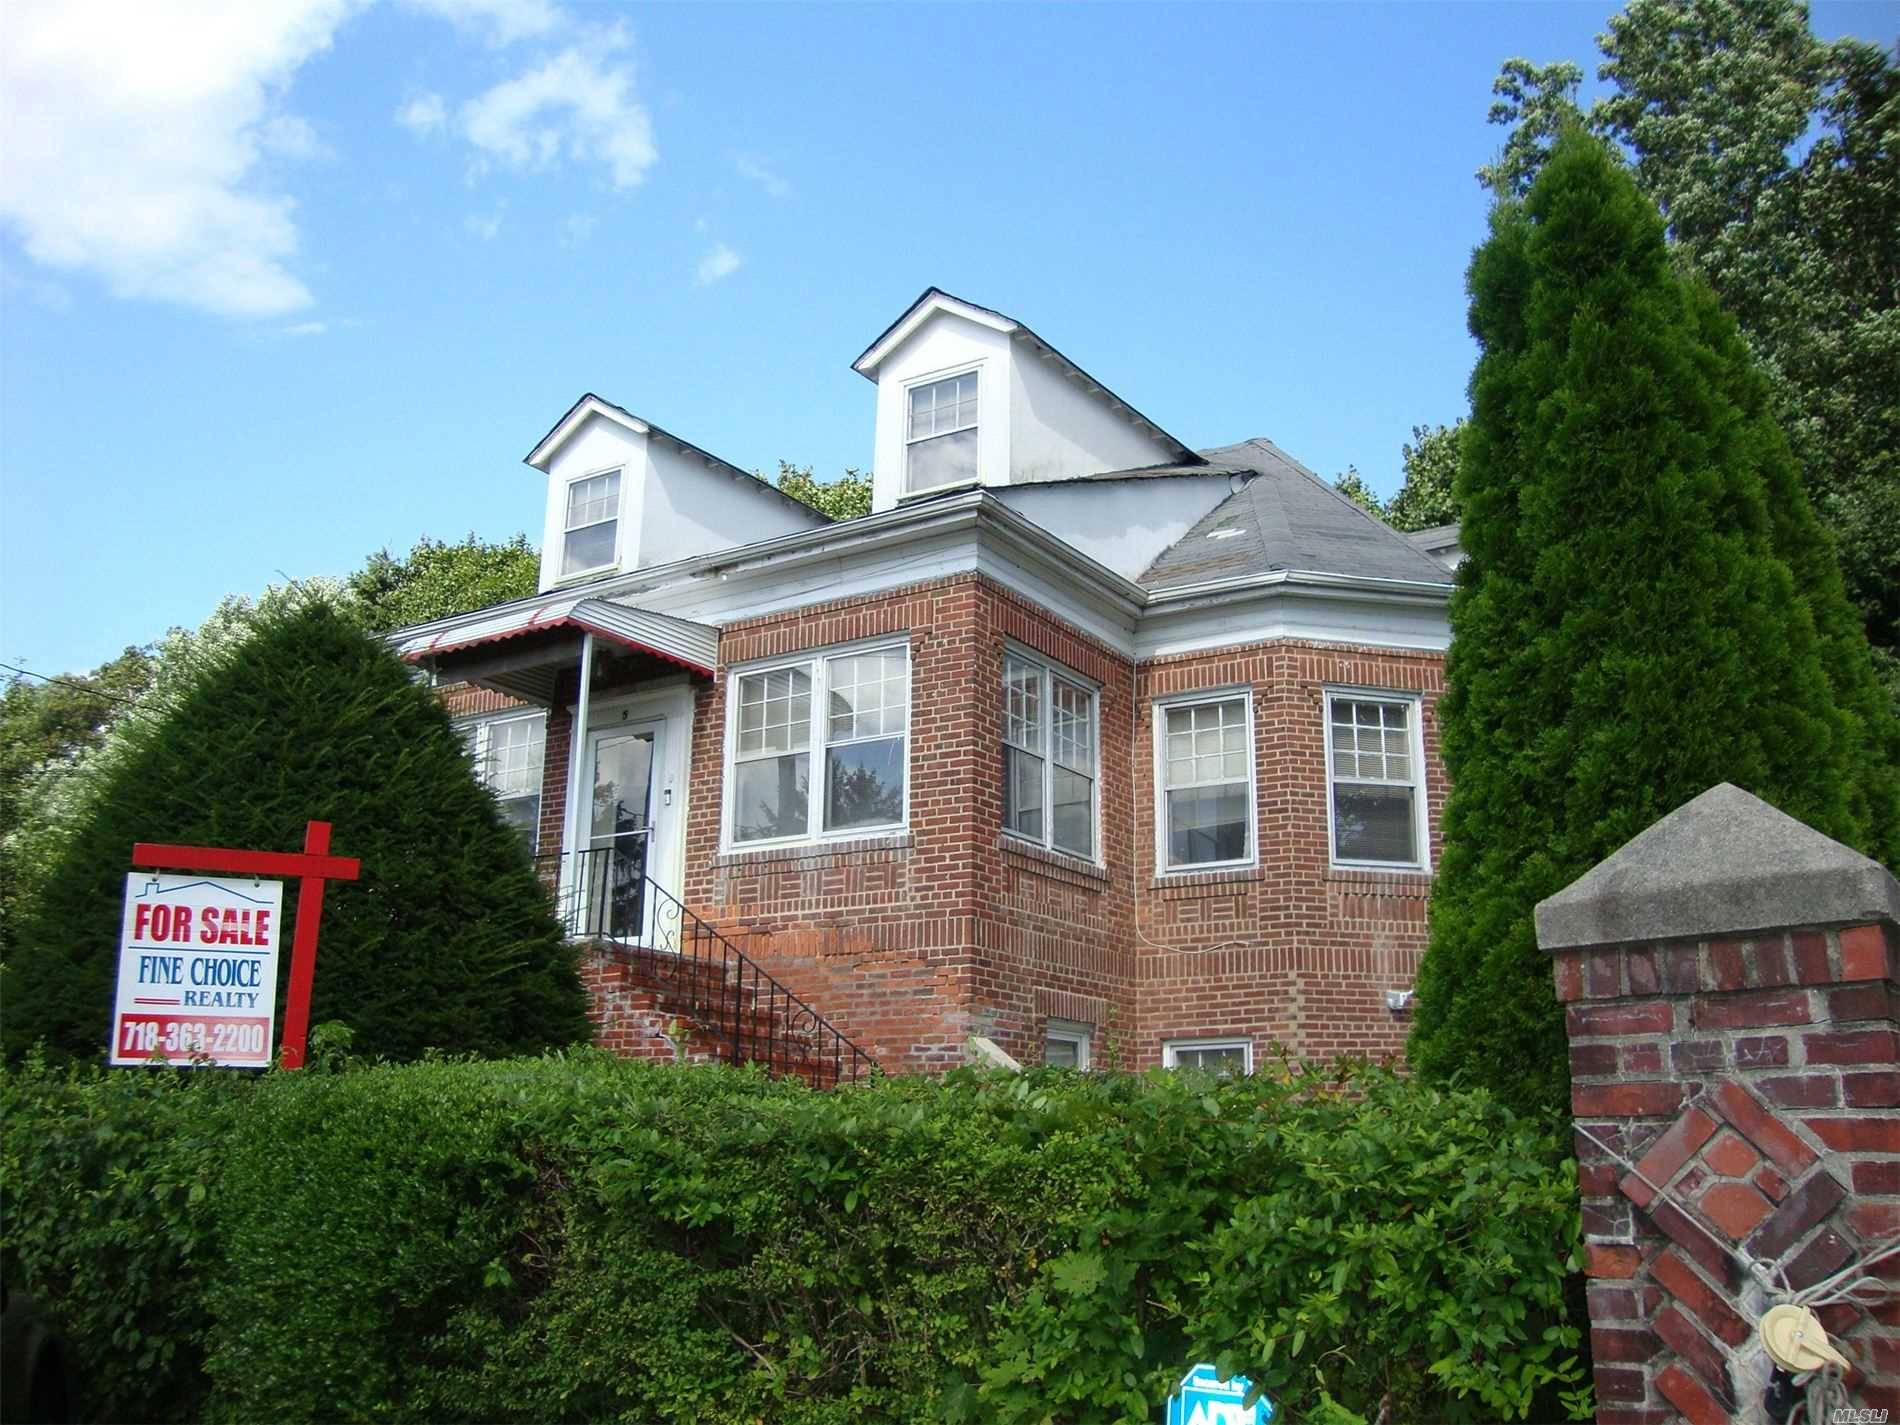 5 N High St is a one family house in Elmsford, NY 10523.